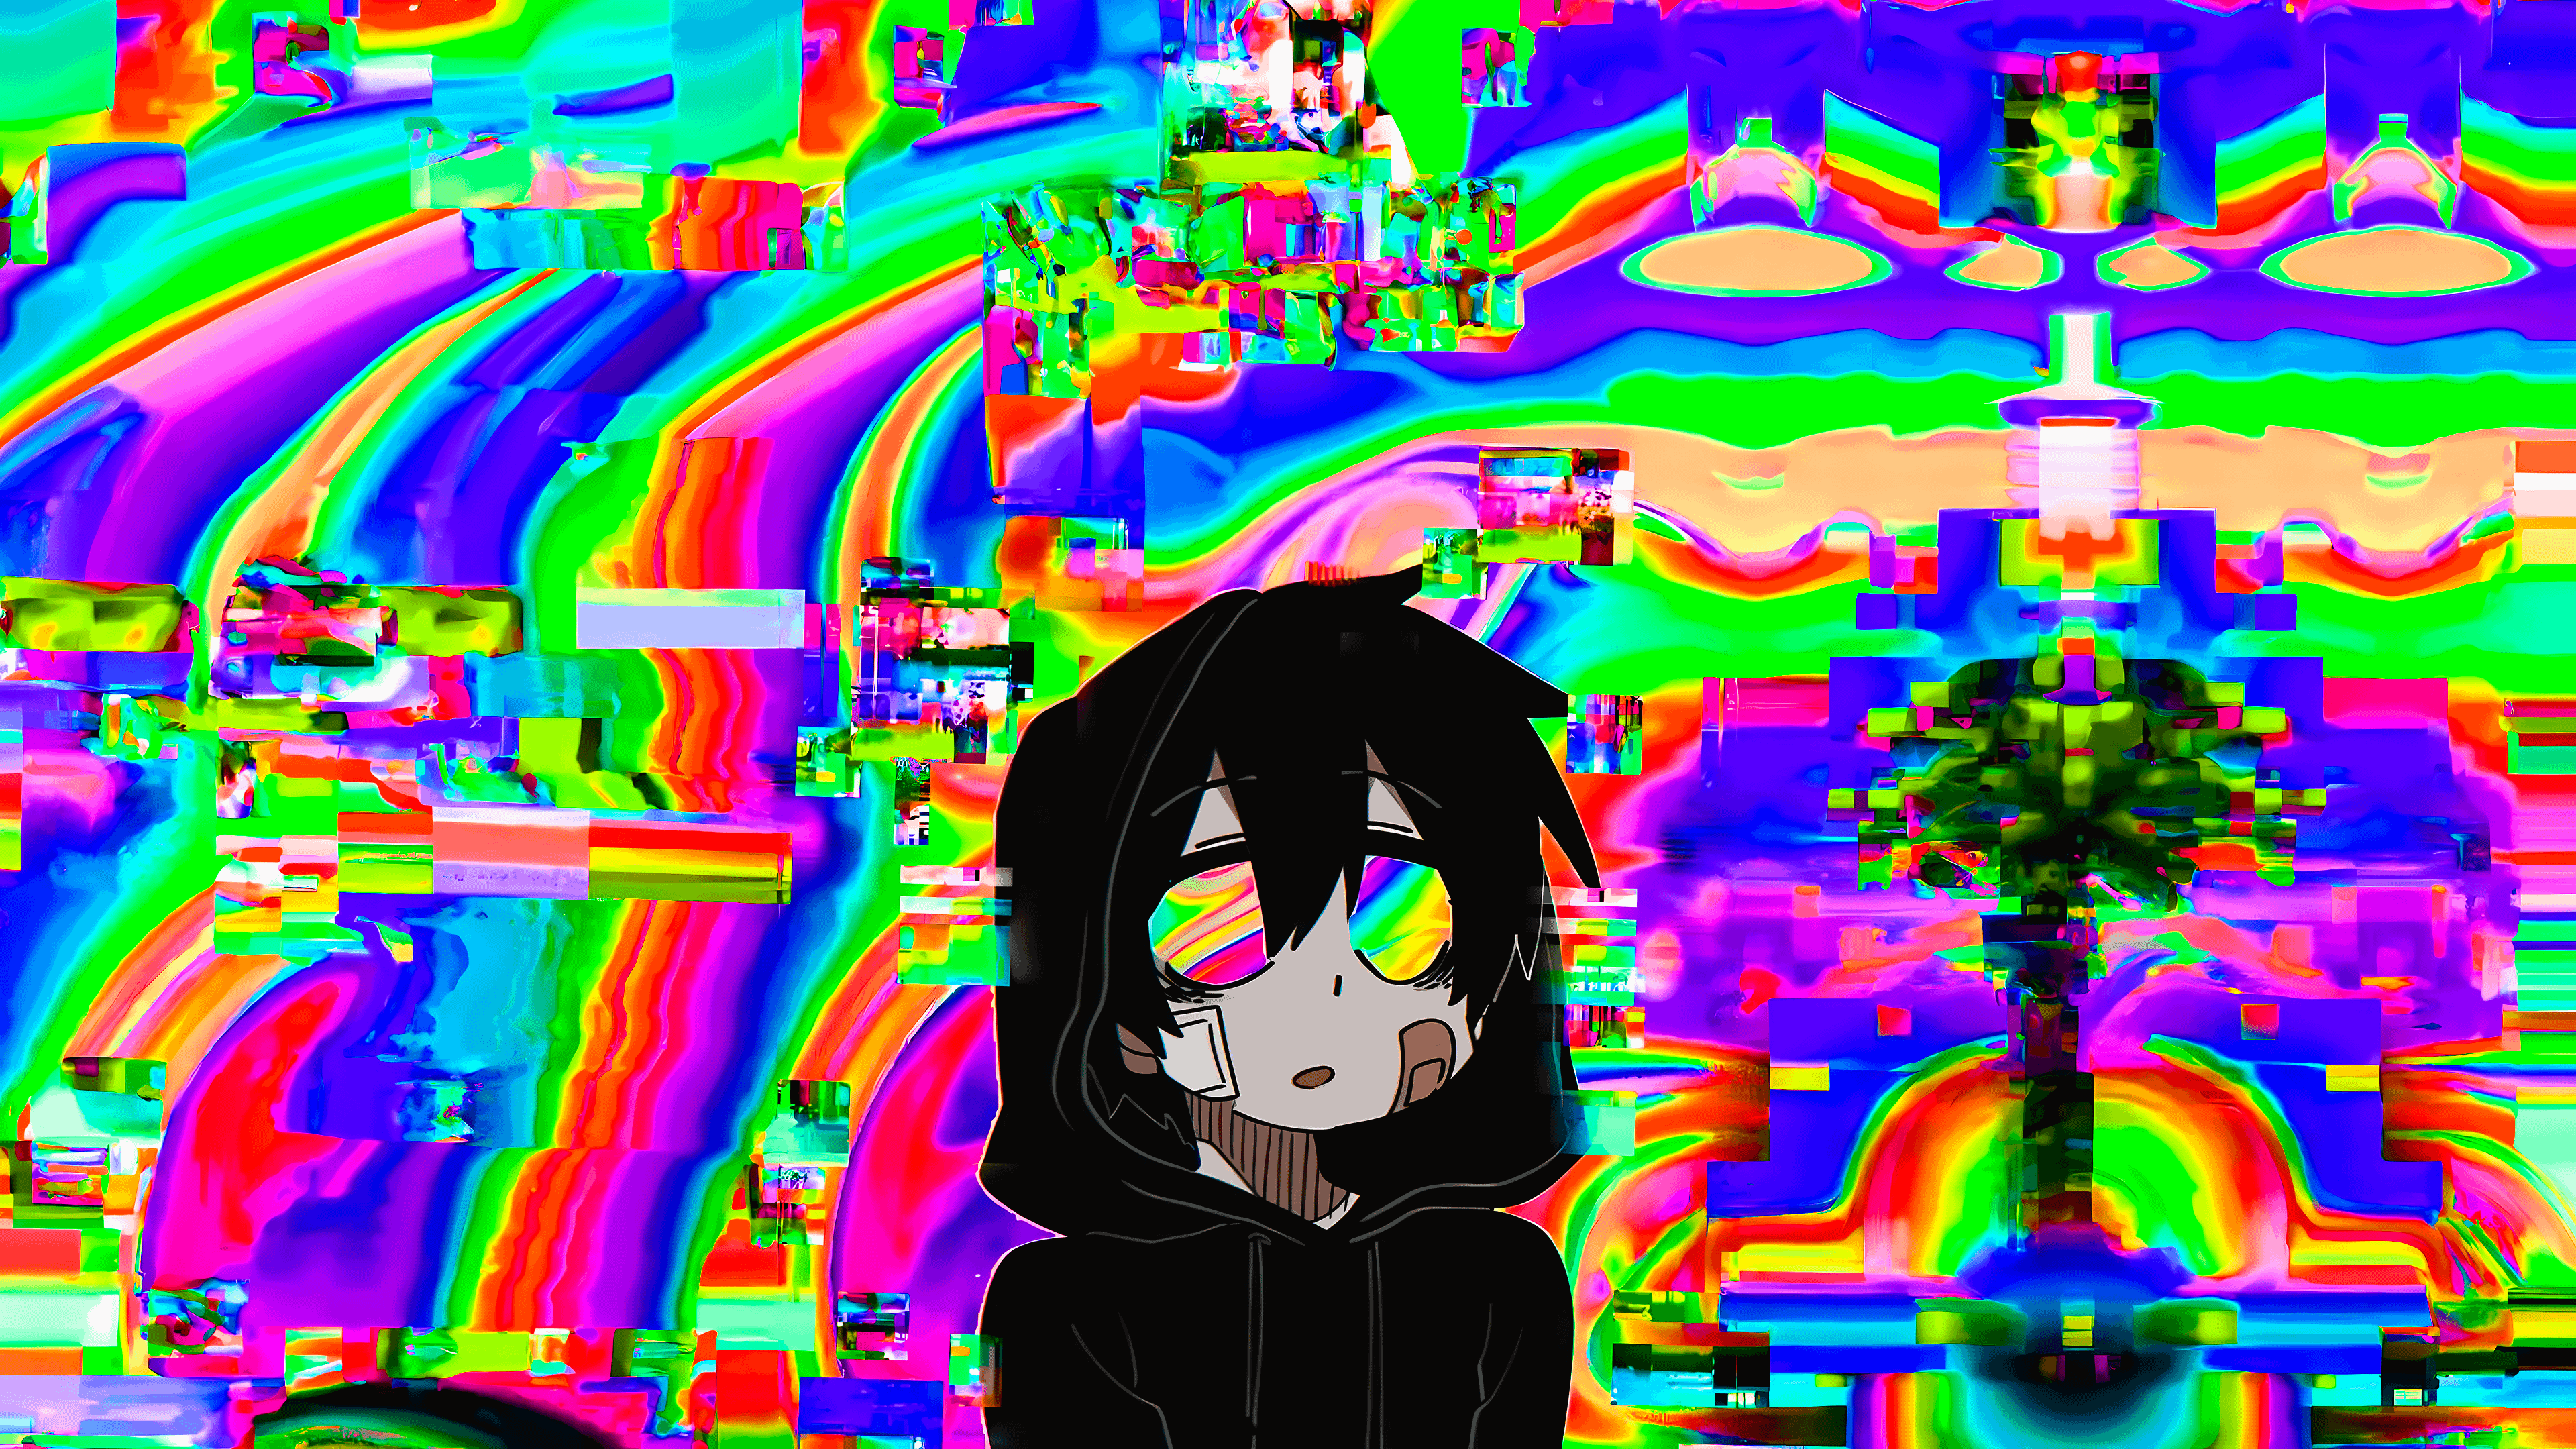 A black haired anime character with a hoodie and rainbow eyes stands in front of a colorful, distorted background. - Webcore